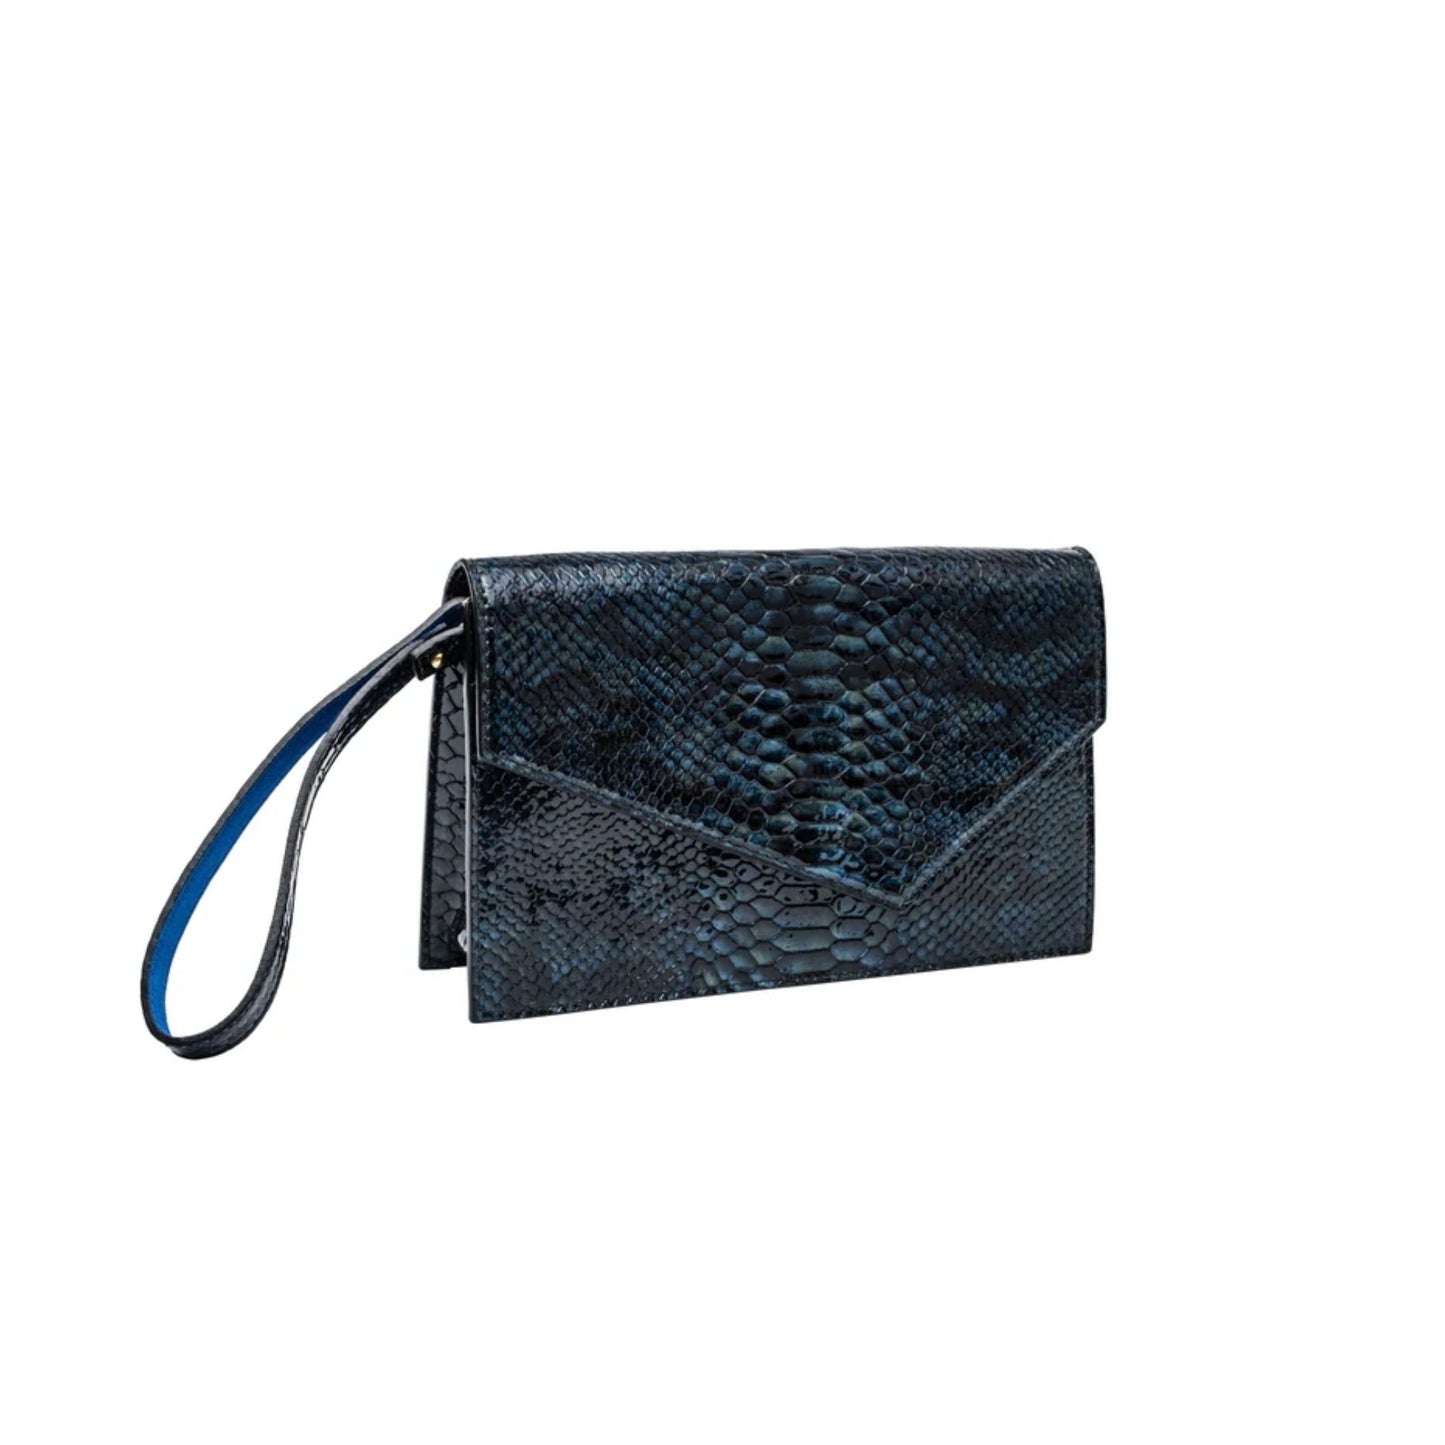 Unisex Genuine Leather Clutch Bag | Made in Montreal